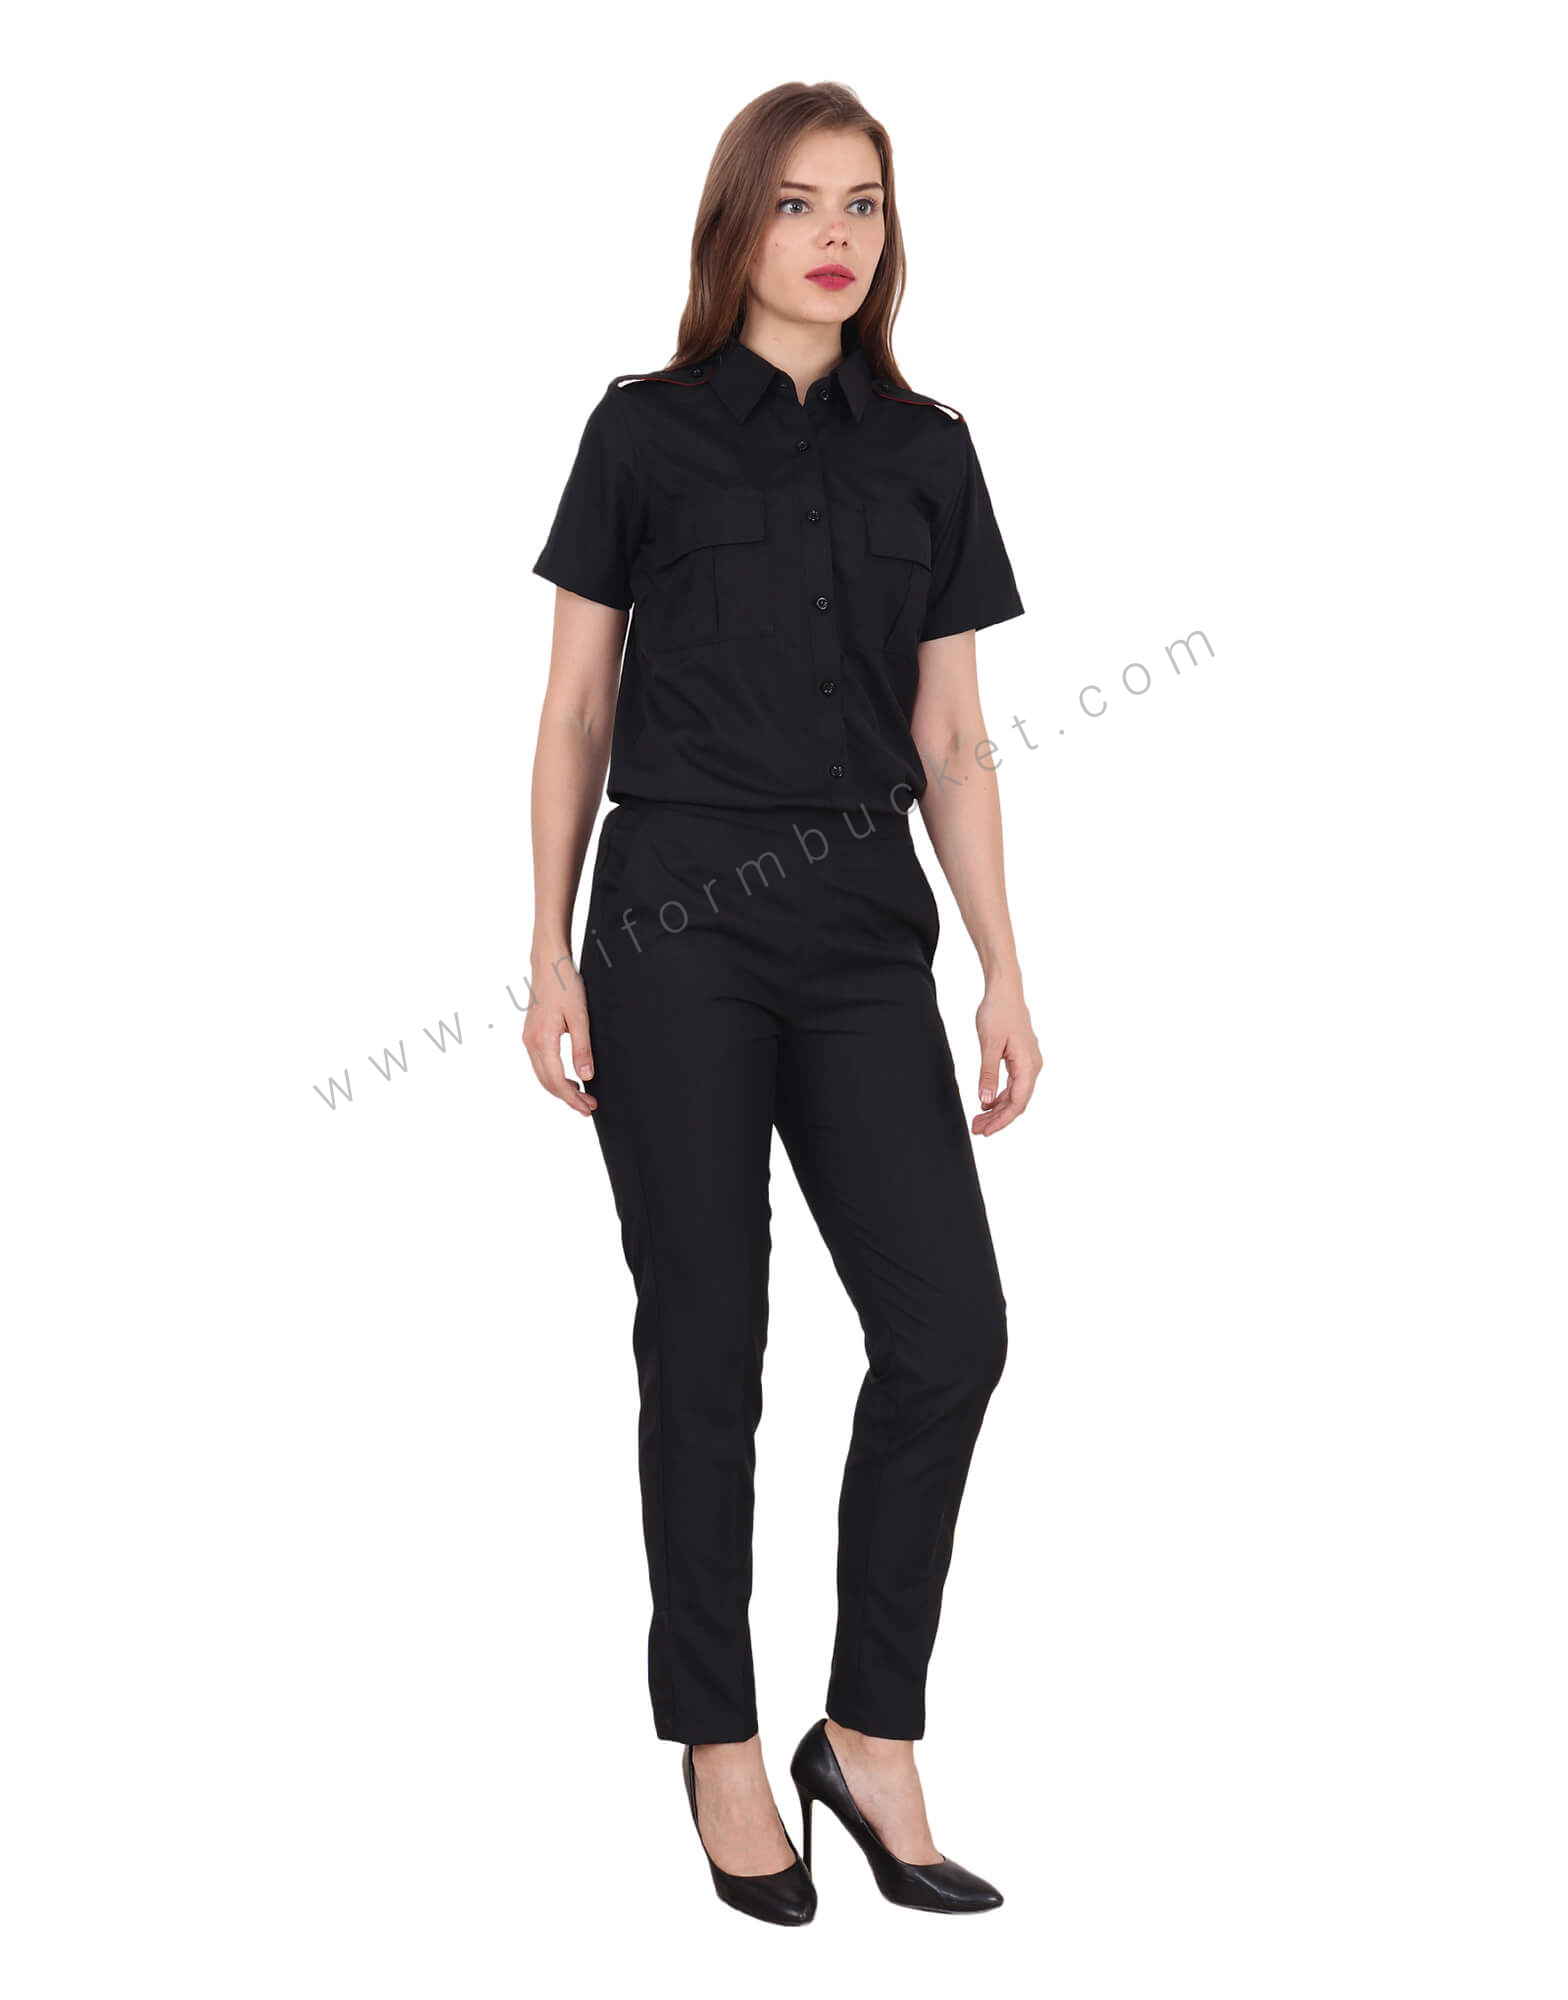 Black Security Guard Shirt For Female